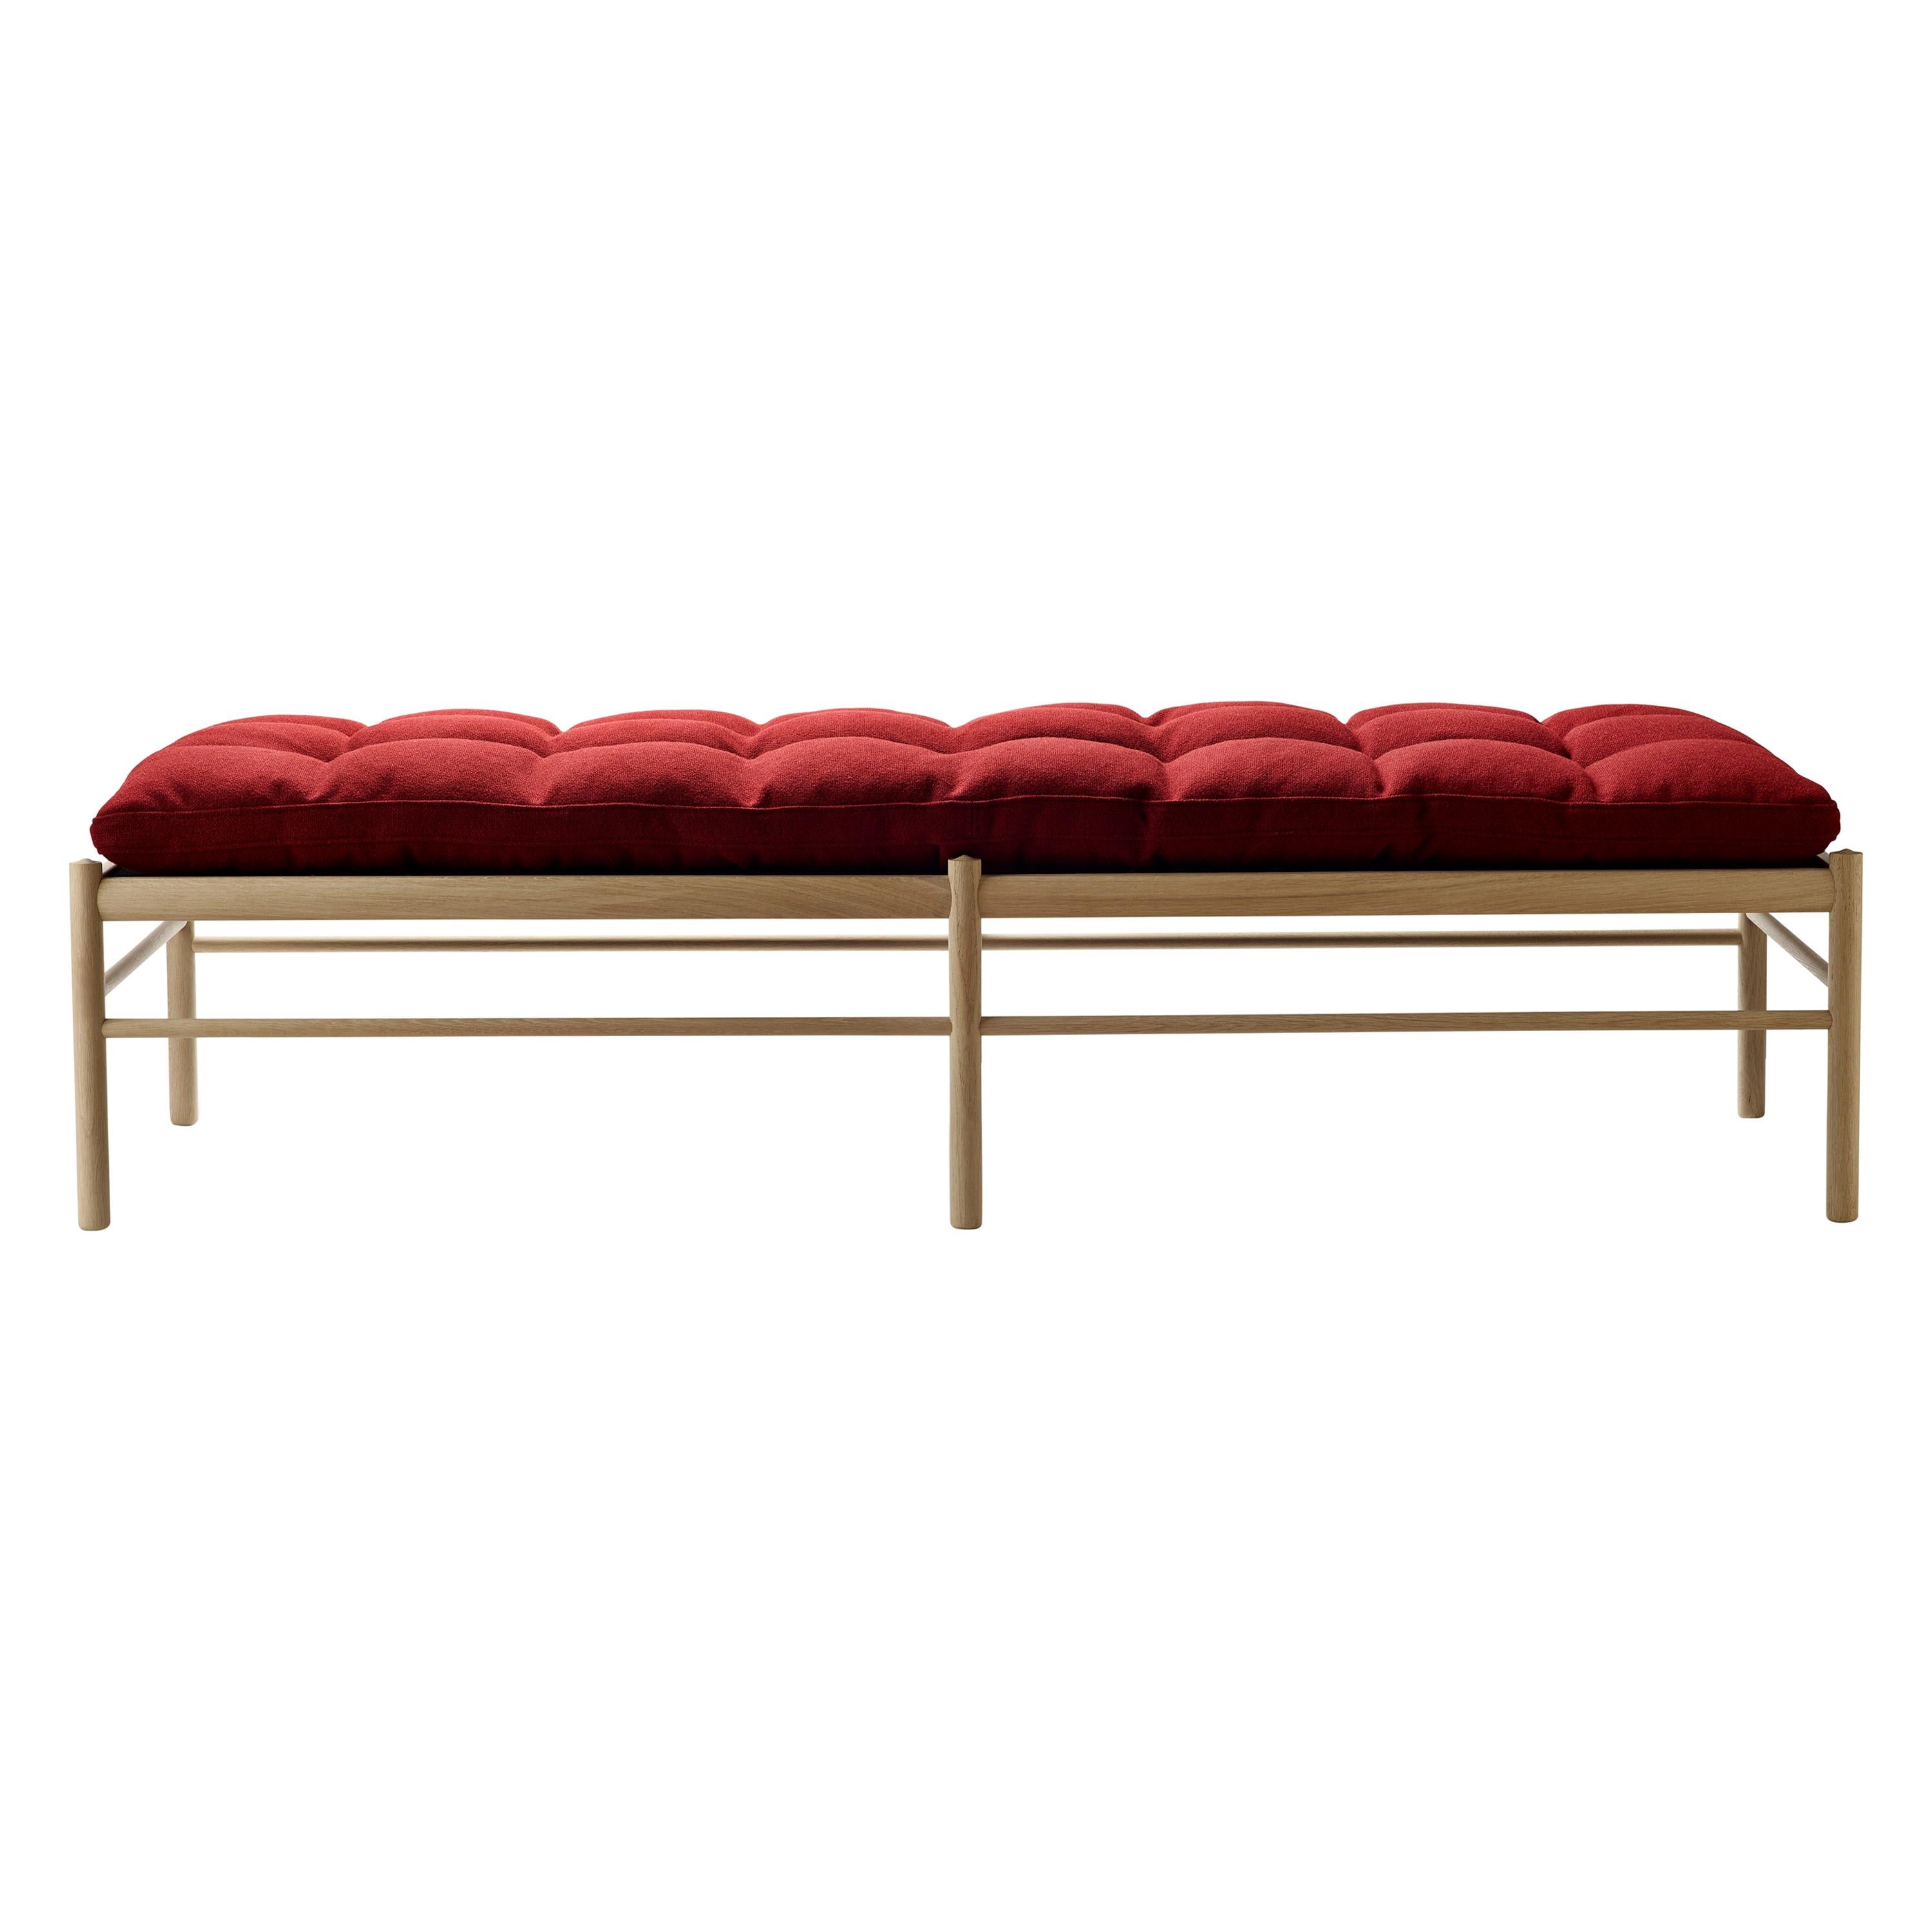 Red (Kvadrat Hallingdal65 694) Ow150 Colonial Daybed in Oak Soap with Fabric Cushion by Ole Wanscher